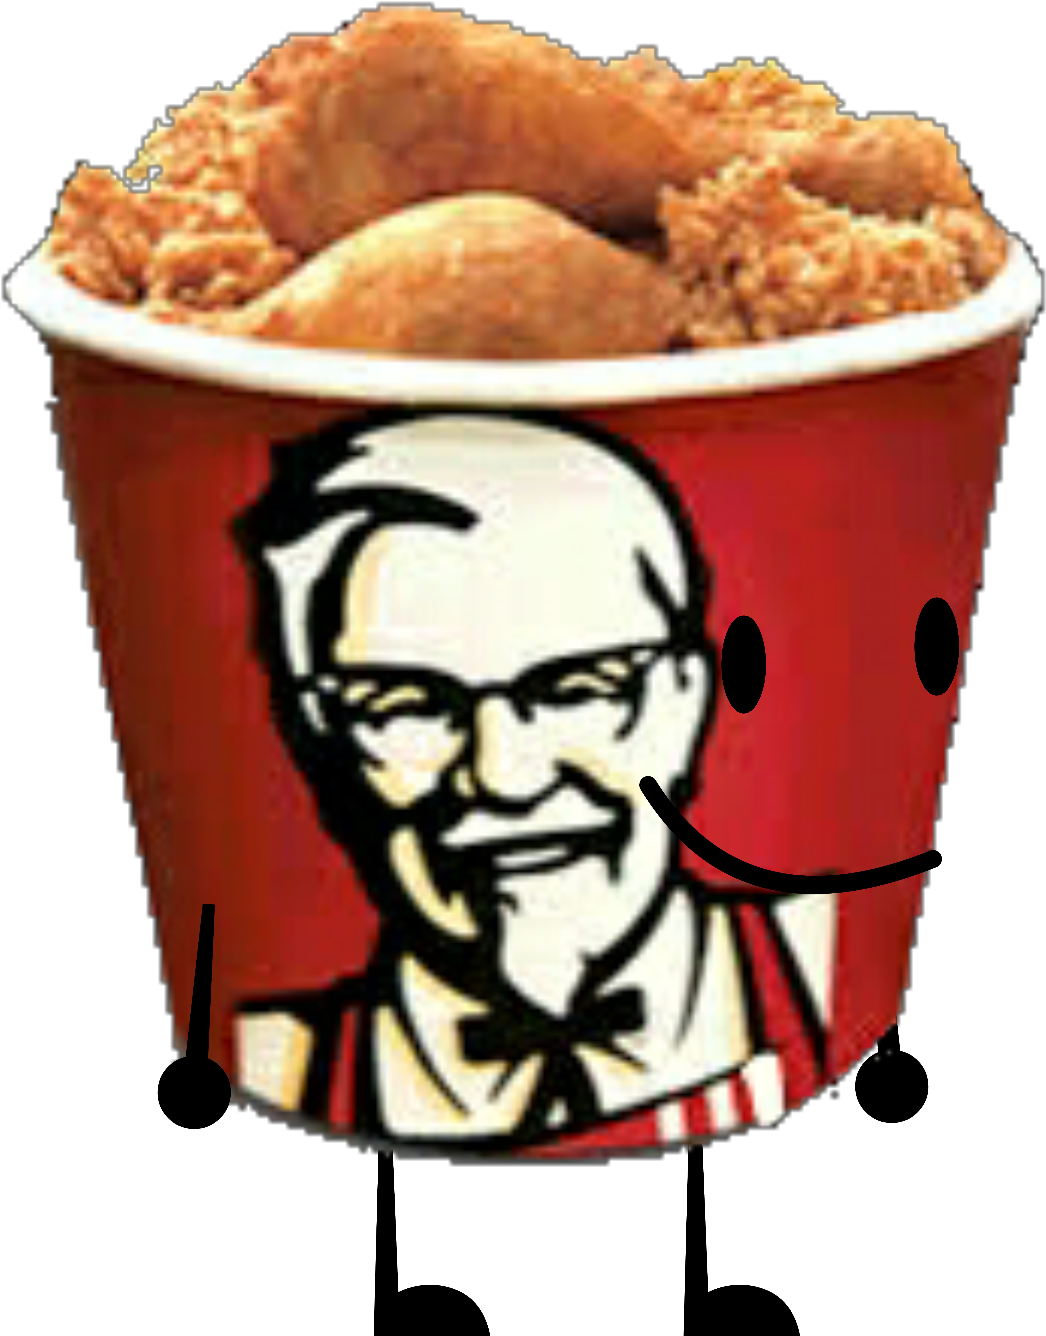 Fried Chicken Bucket - Play X Store Universal 3 In 1 Cell Phone Camera Lens (1360x1543)